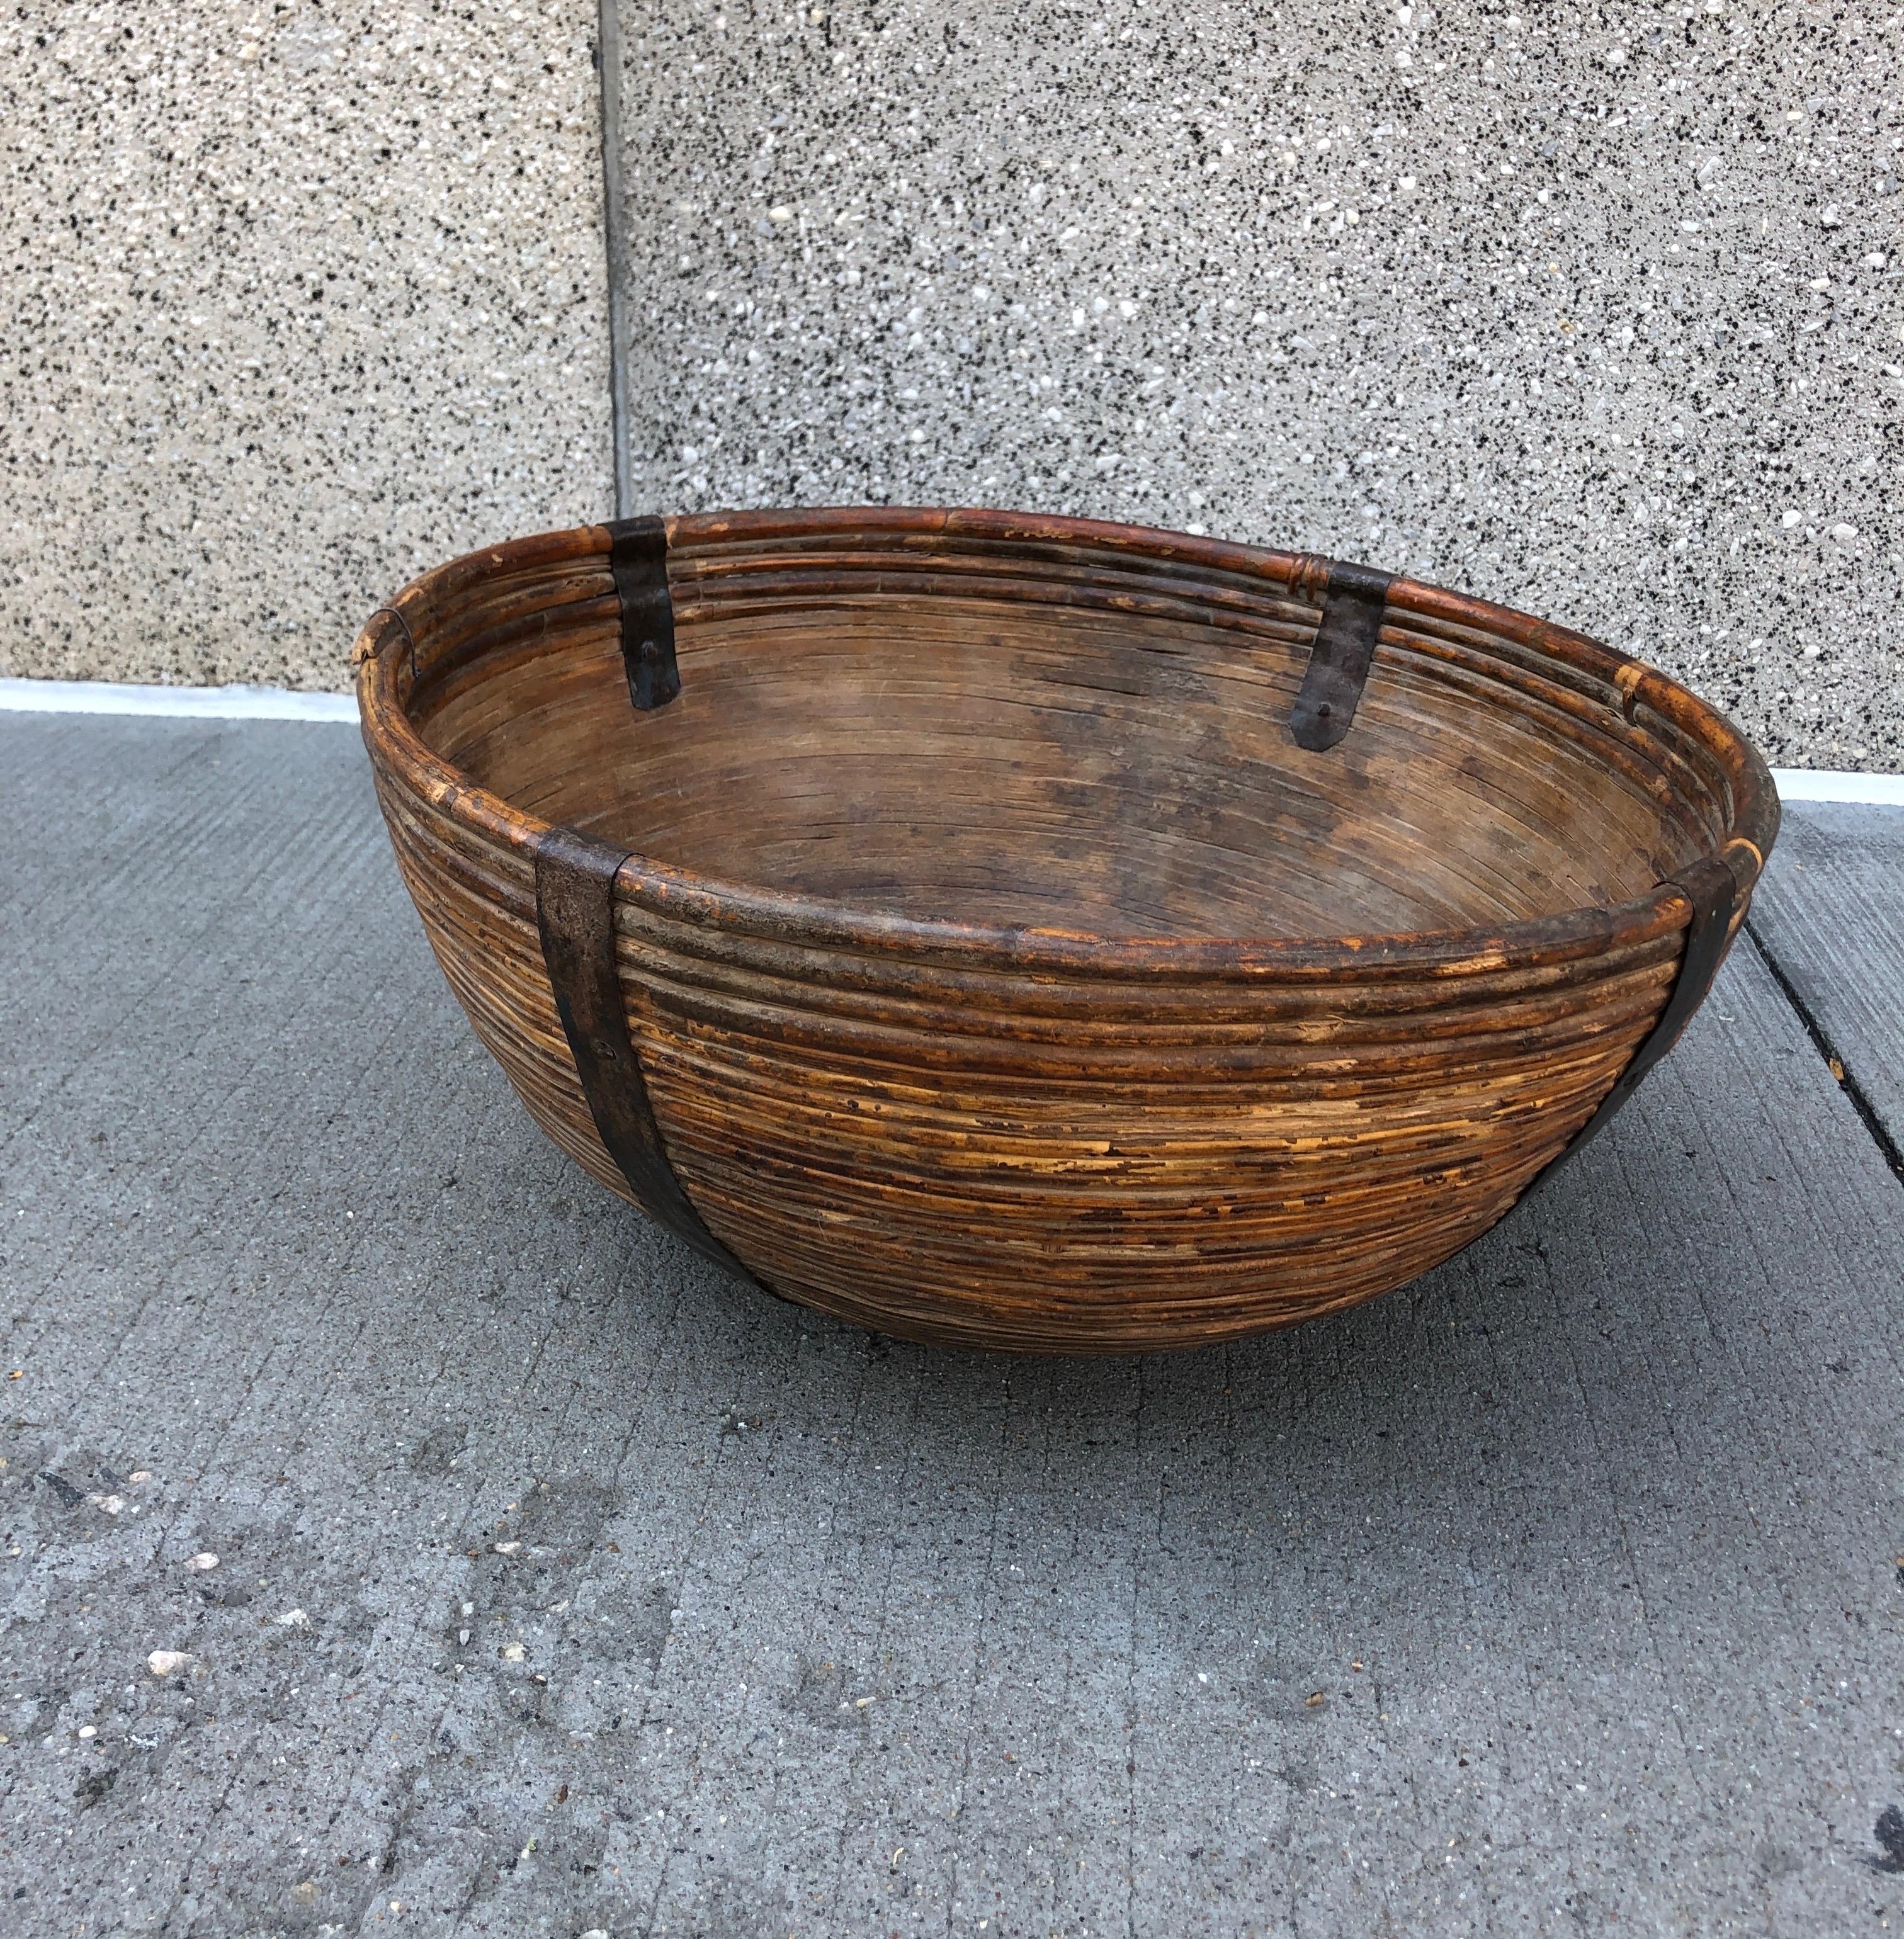 Fiber/Wood Bowl with Metal Supports 6